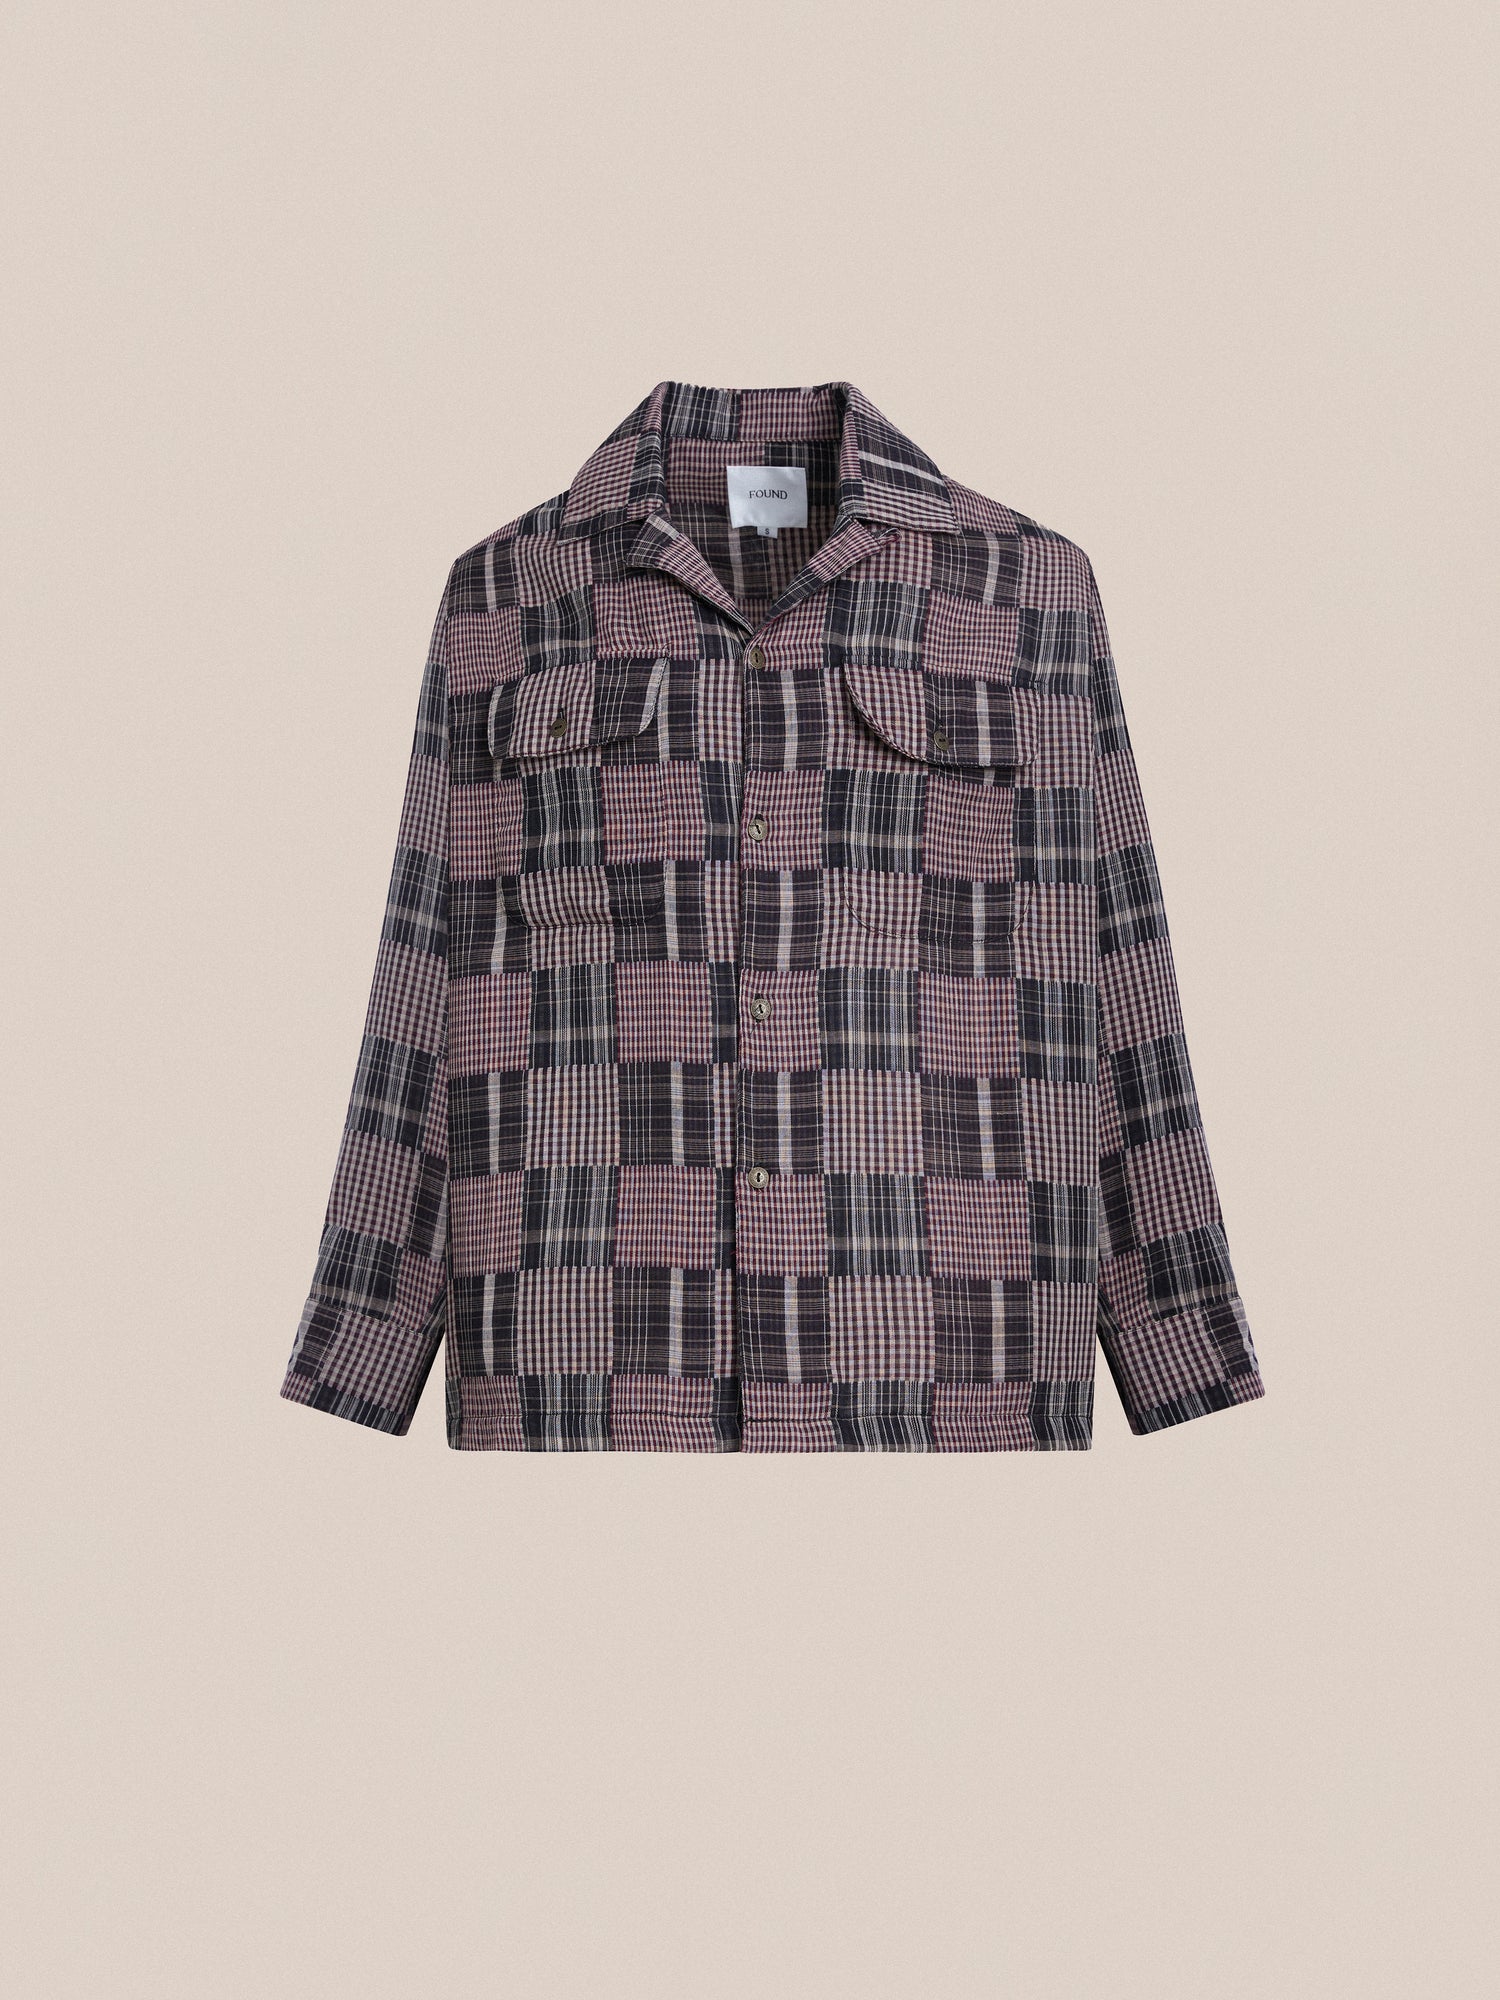 A Found Multi-Flannel LS Camp Shirt with a timeless silhouette, featuring a checkered pattern in pink and black.